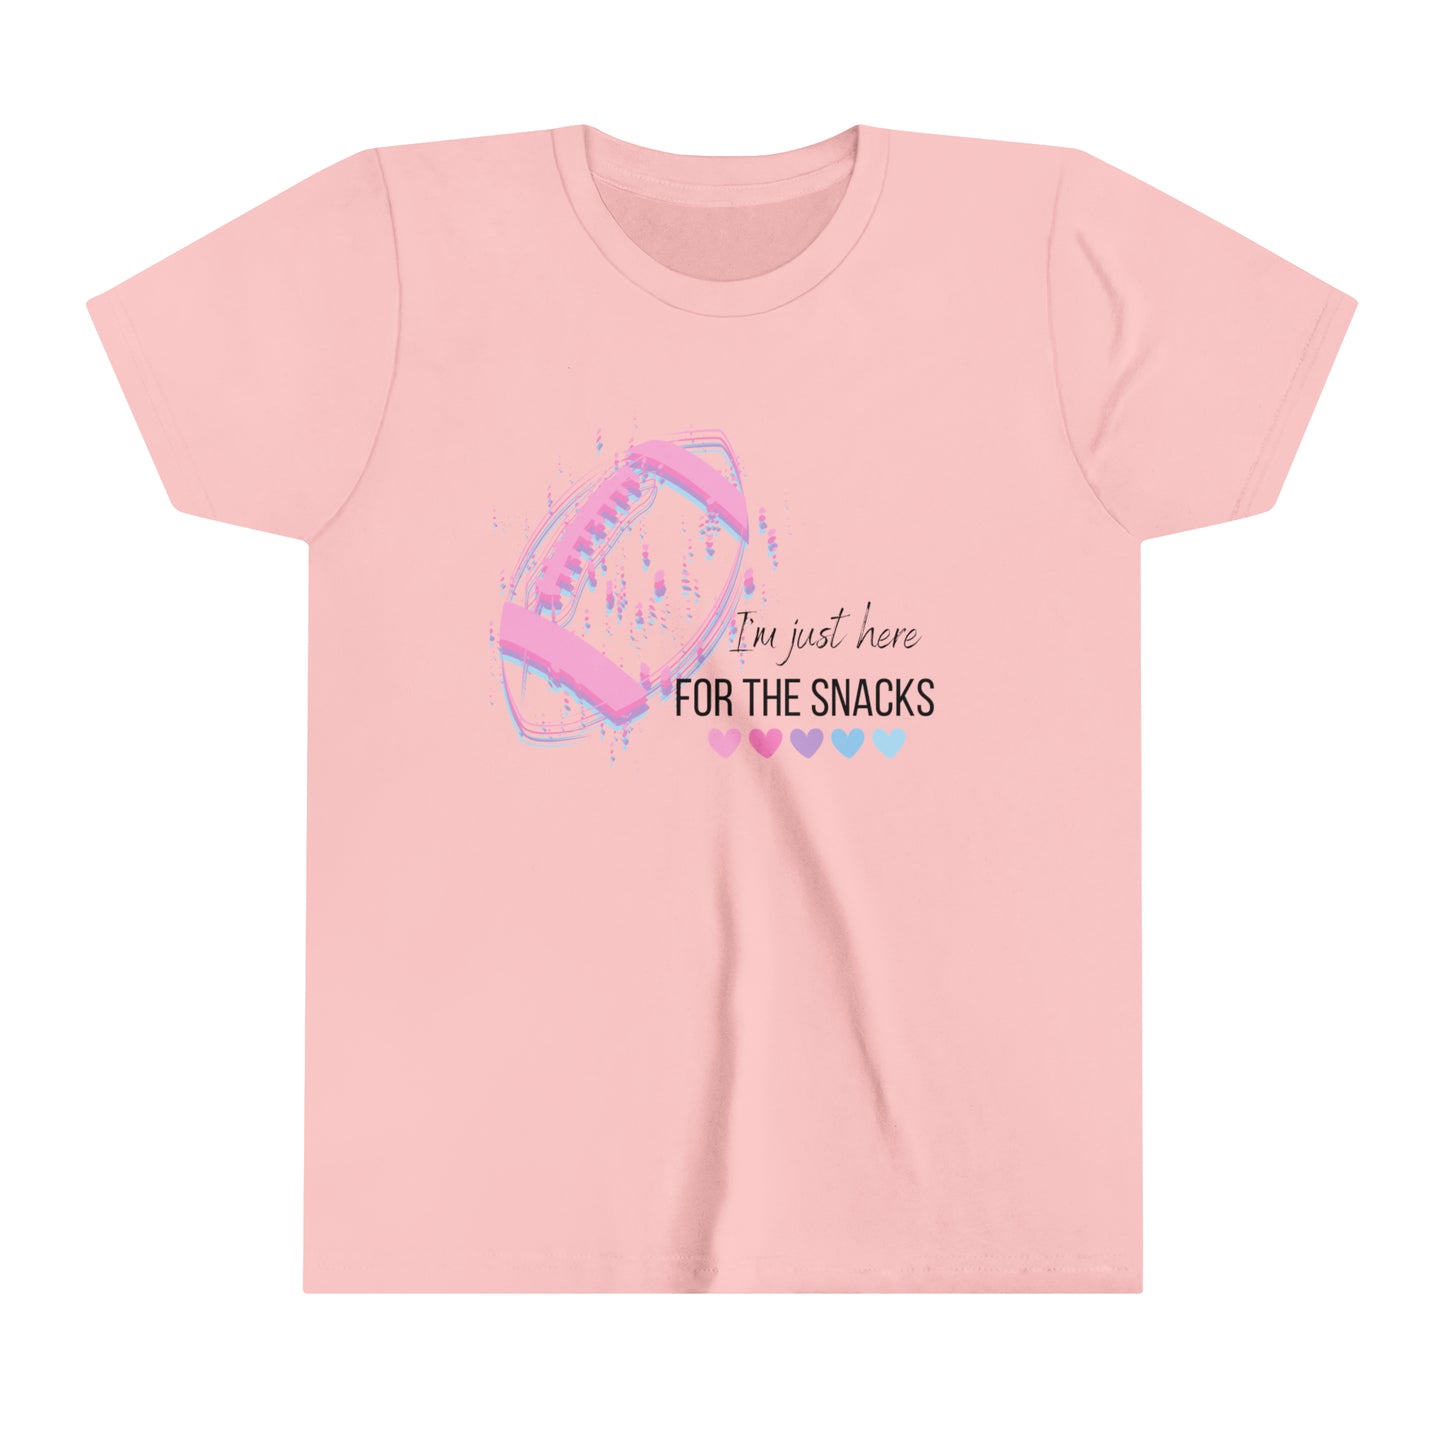 I'm just here for the snacks football youth t shirt